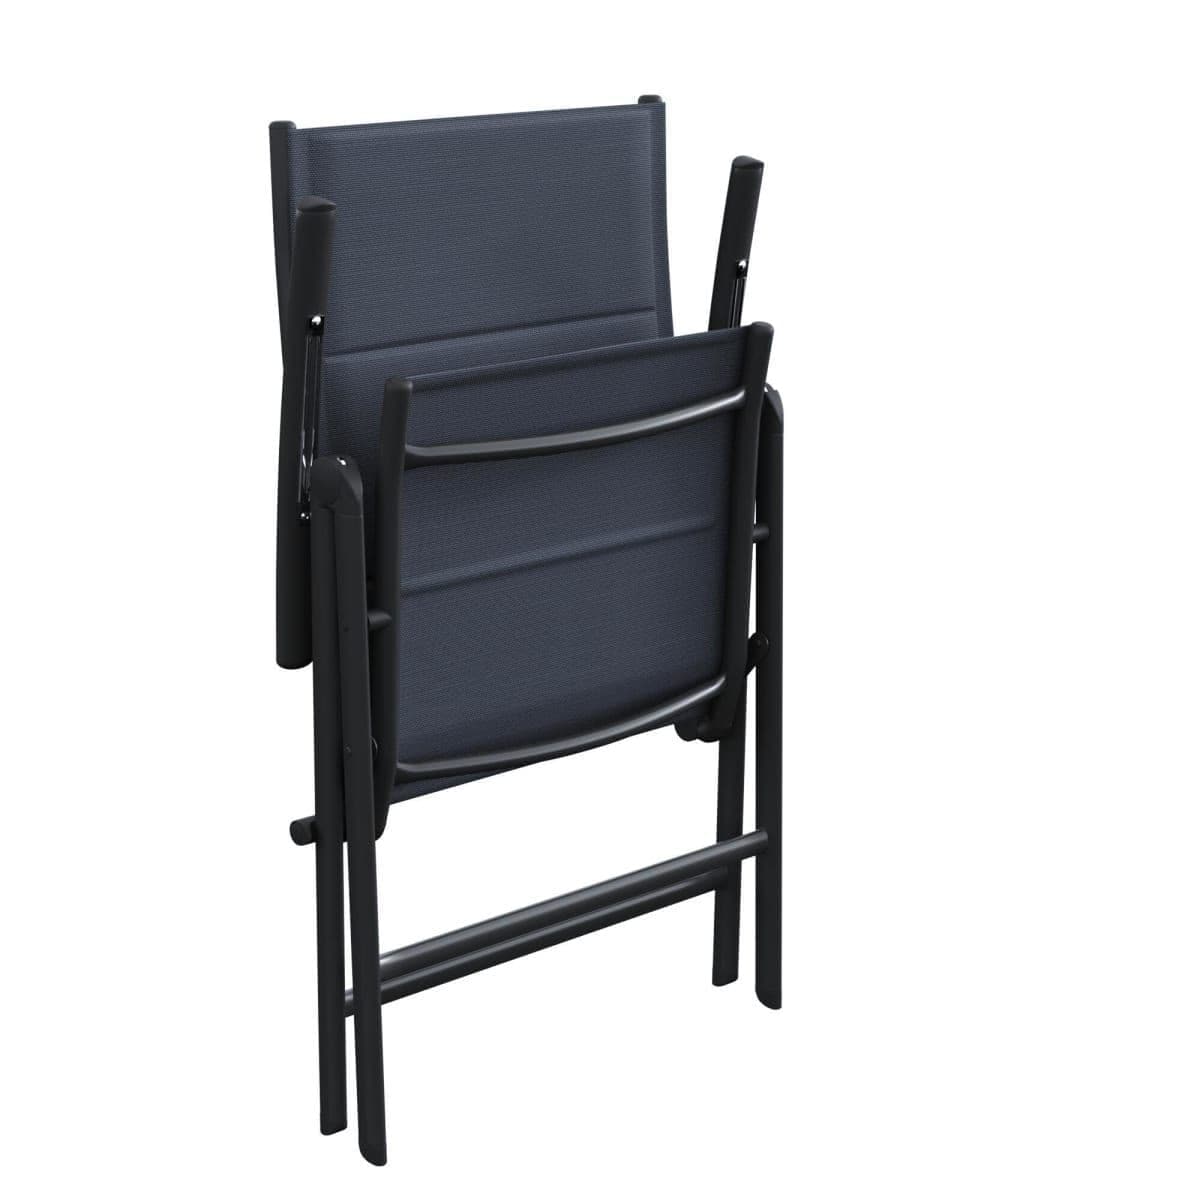 ARMCHAIR ORION II NATERIAL Aluminum, textilene, anthracite multiposition - Premium Sun Loungers and Armchairs from Bricocenter - Just €68.99! Shop now at Maltashopper.com